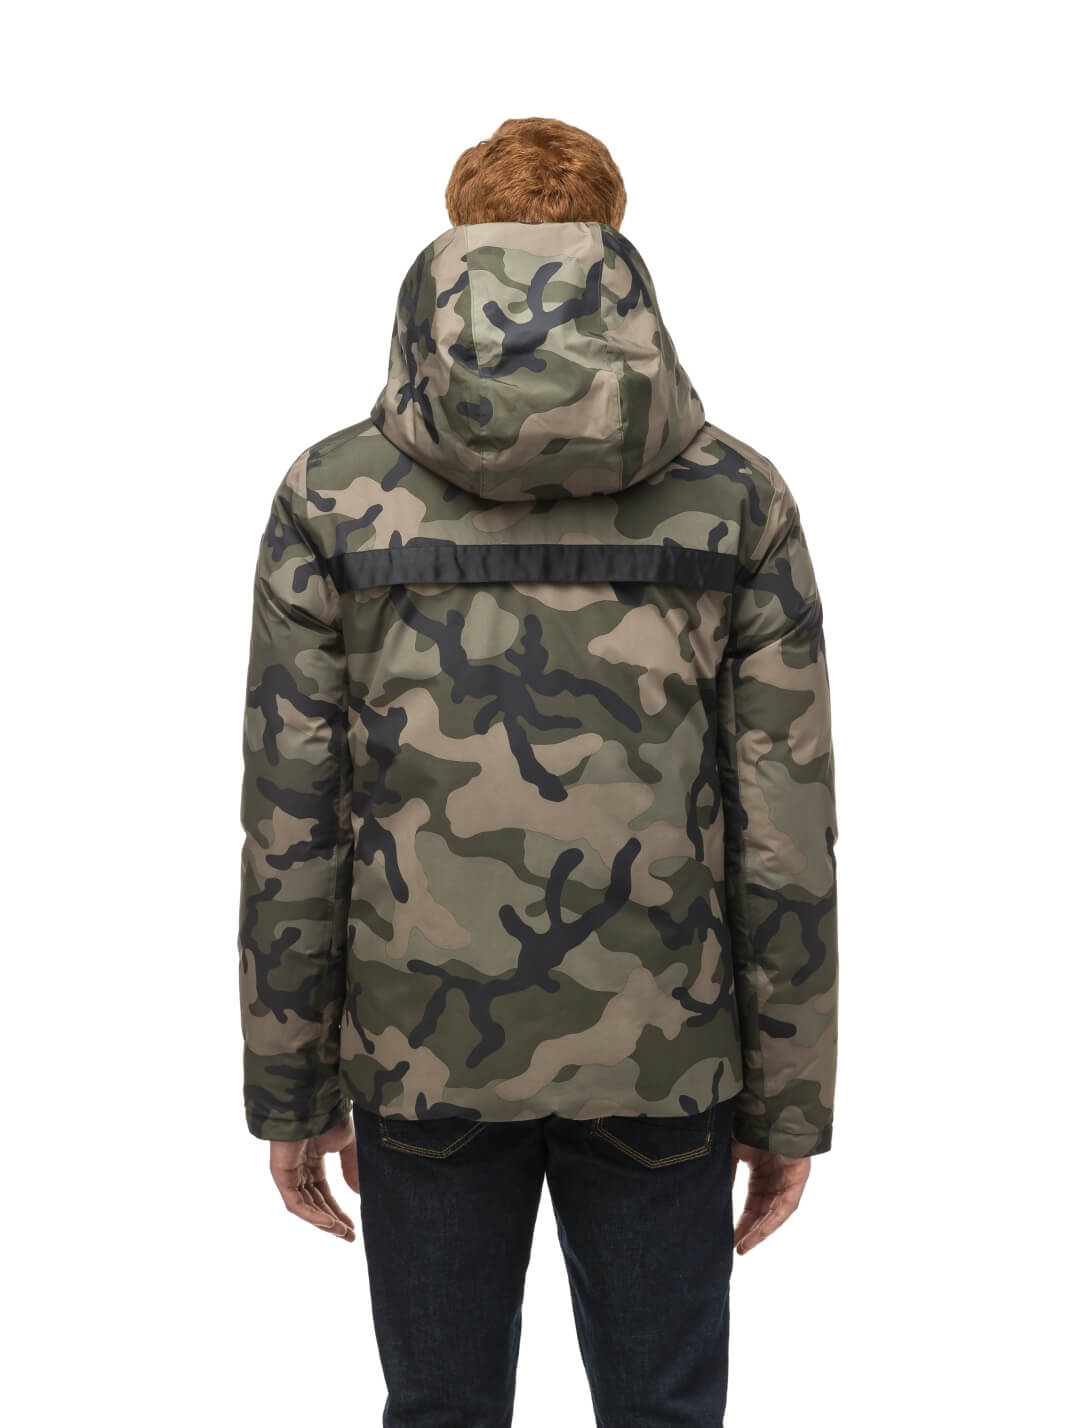 Oliver Men's Oversized Reversible Puffer from waterproof side to quilted puffer side, Canadian Duck Down insulation, in hip length, removable down-filled hood, multiple zipper pockets, 2-way center-front zipper, ribbed cuffs, in Camo